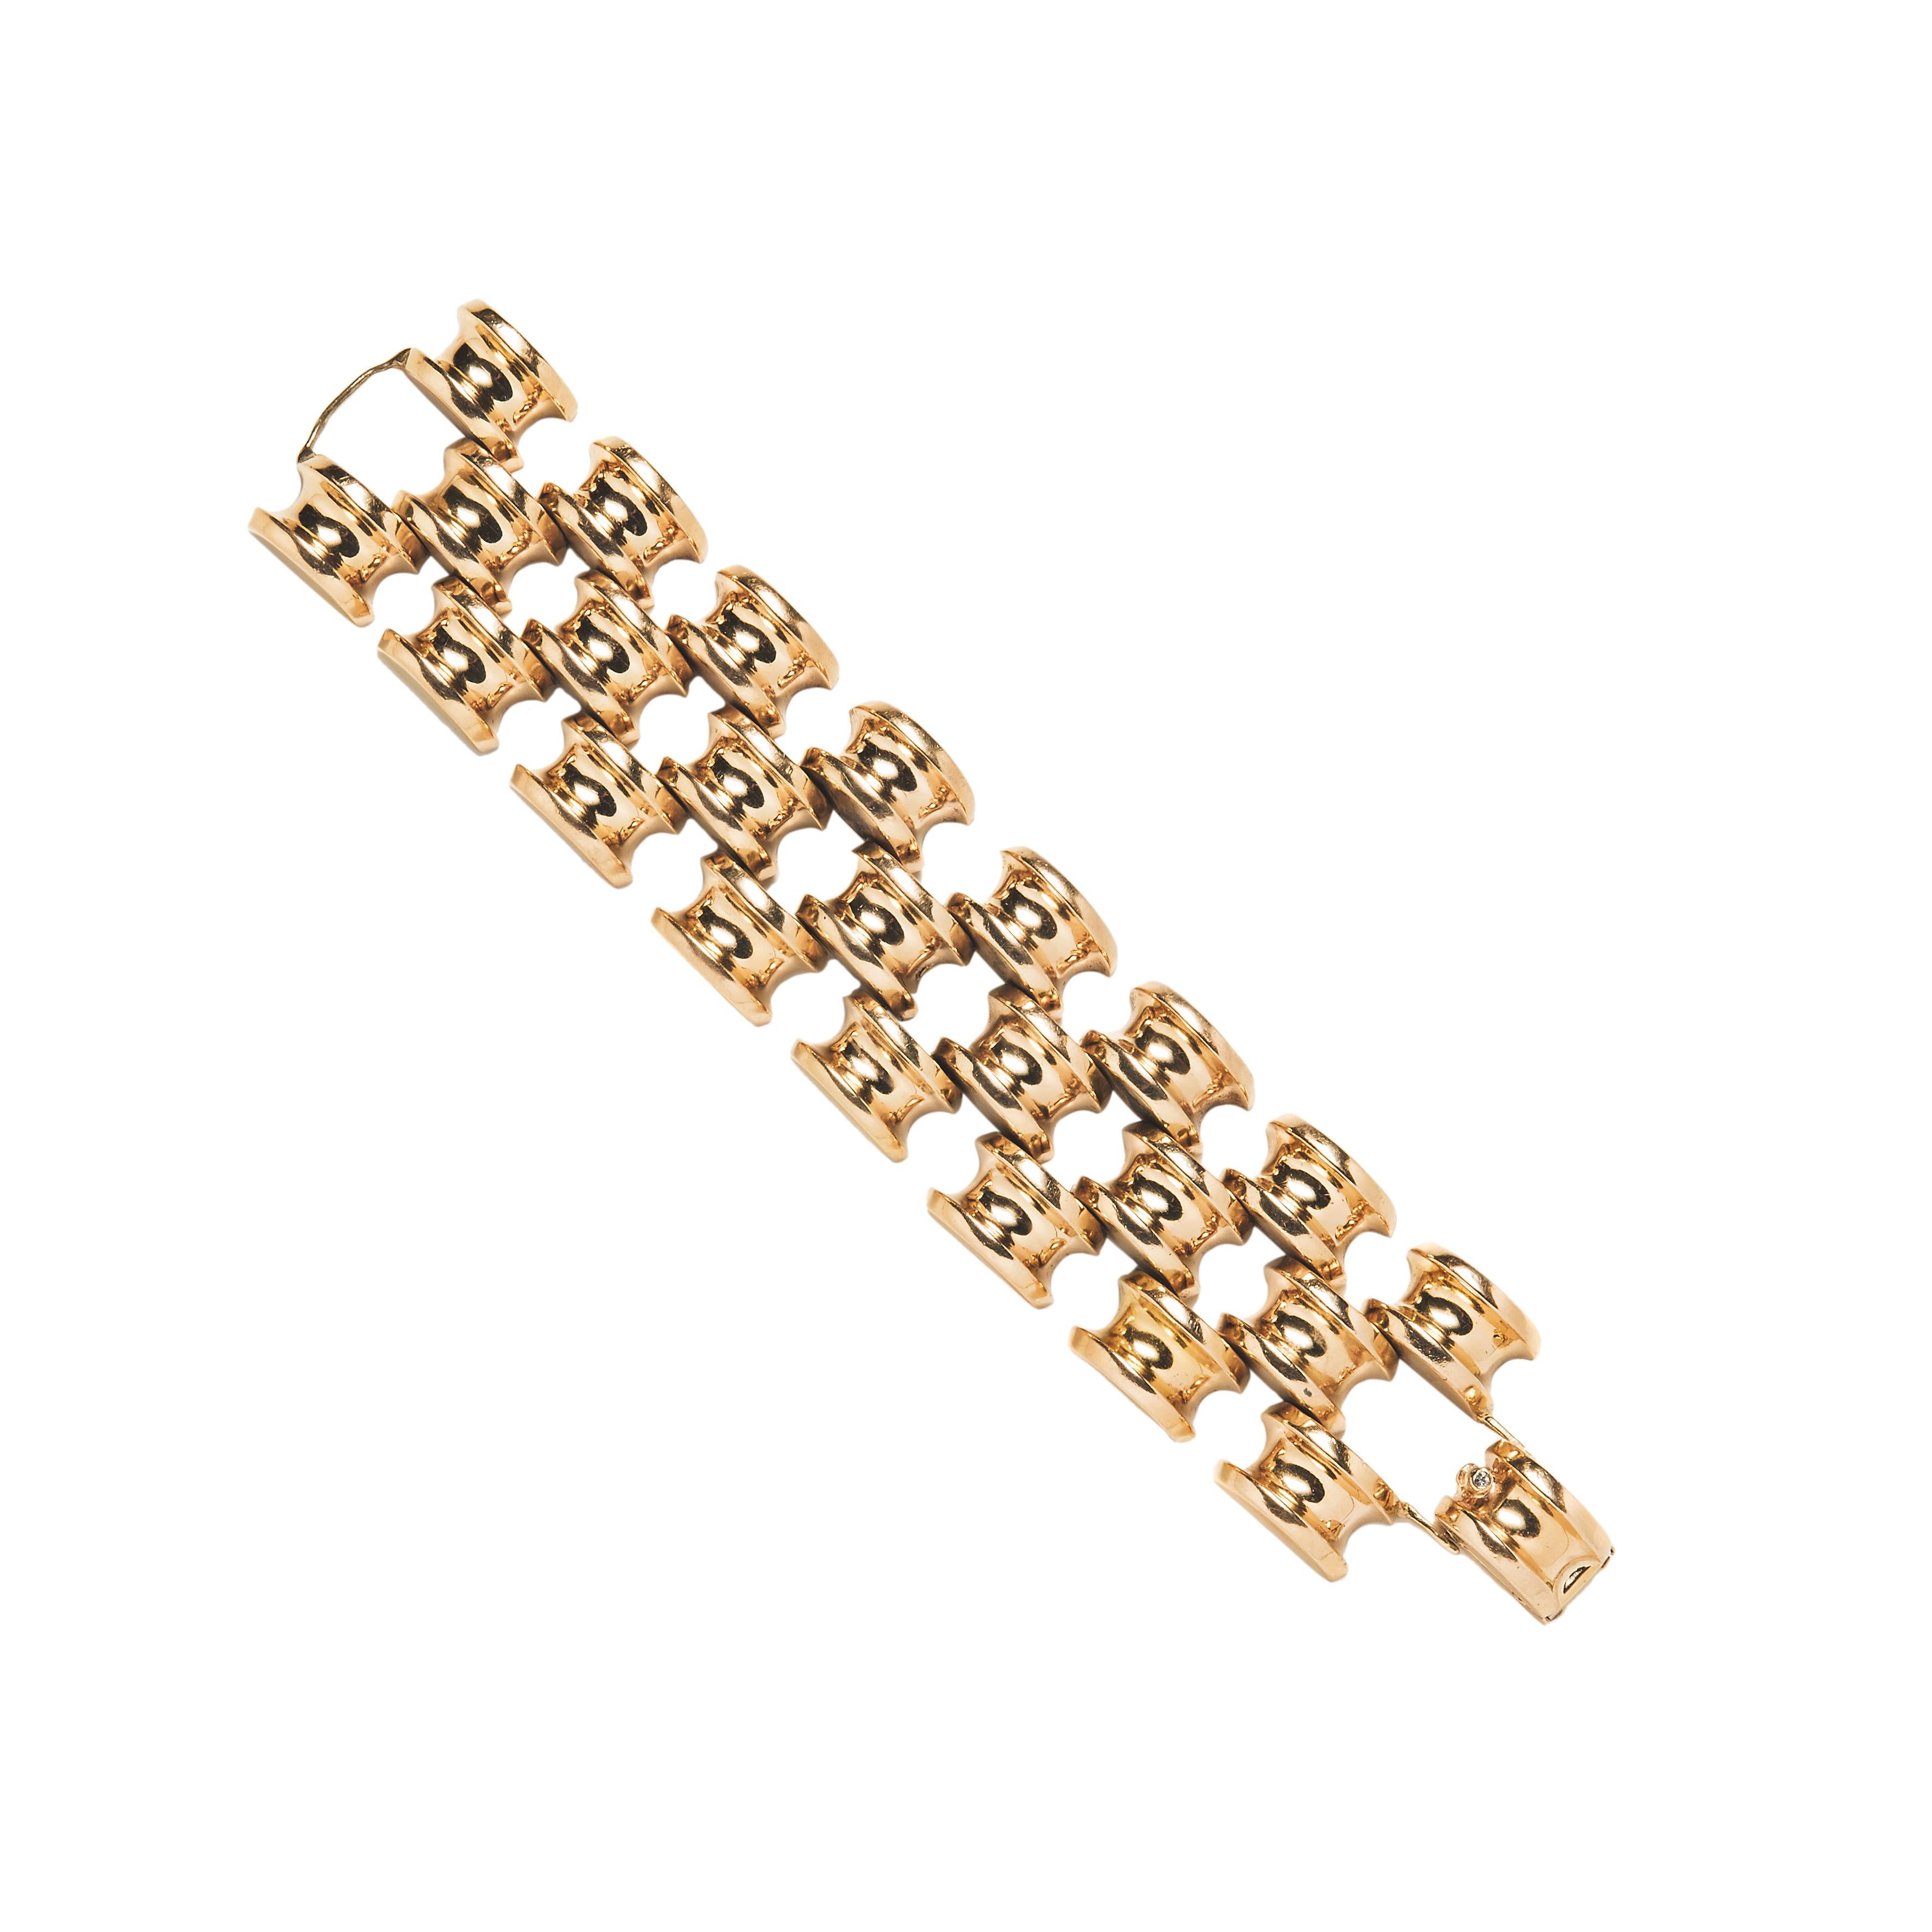 Crafted of 14kt yellow gold, this retro bracelet consists of three rows of articulated domed links in a stacked design. The flexible form wraps comfortably around the wrist and fastens with a fold over clasp highlighted by a single rose-cut